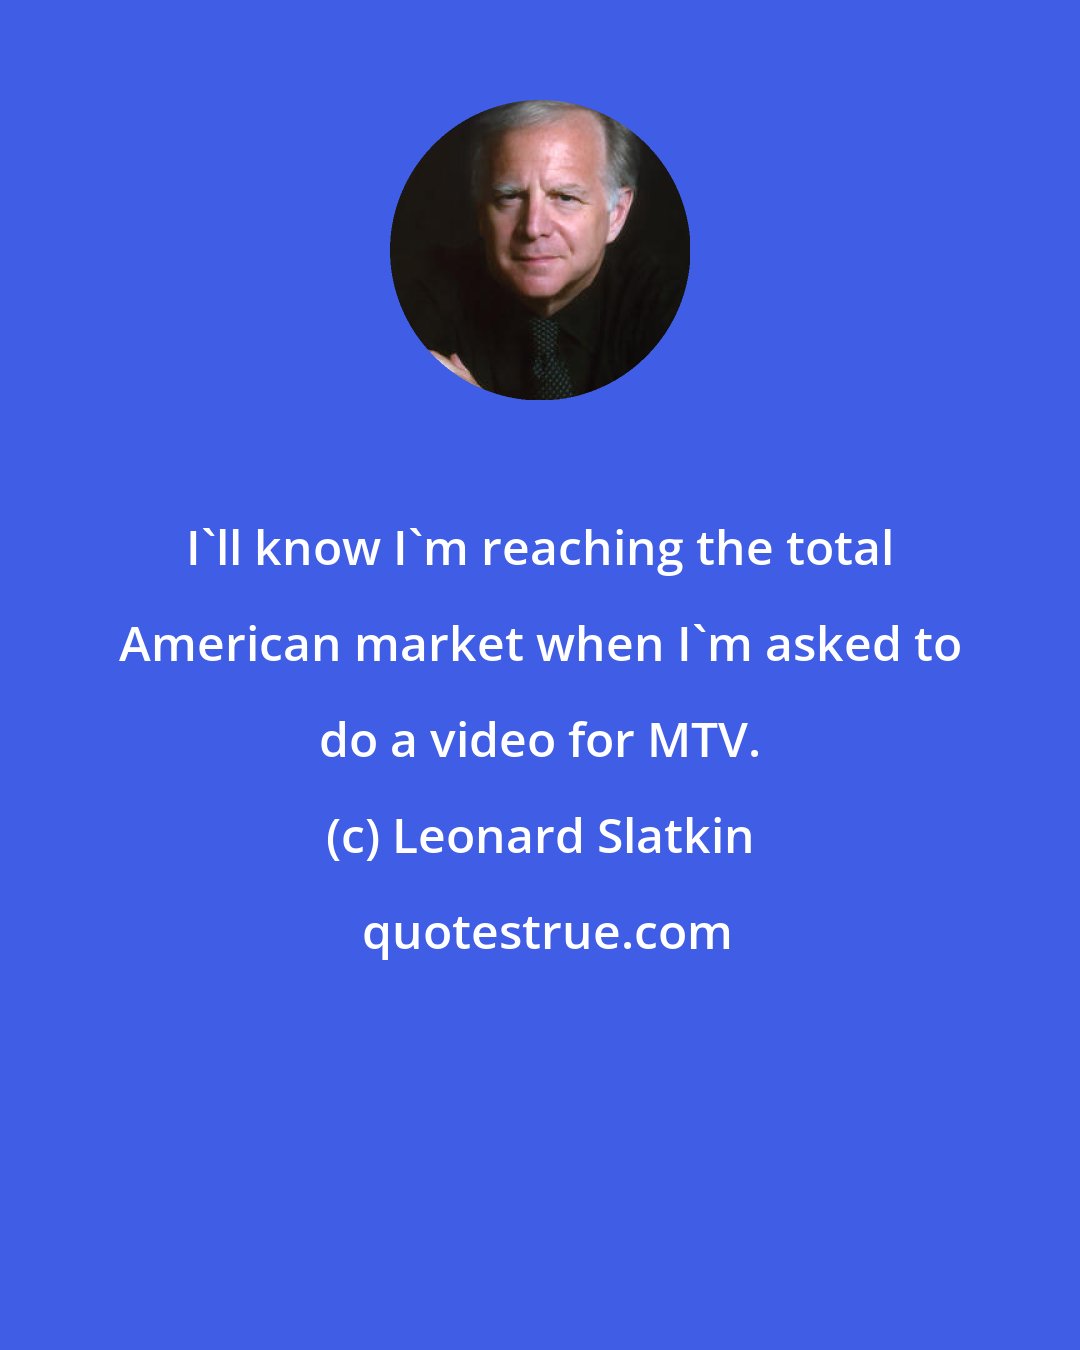 Leonard Slatkin: I'll know I'm reaching the total American market when I'm asked to do a video for MTV.